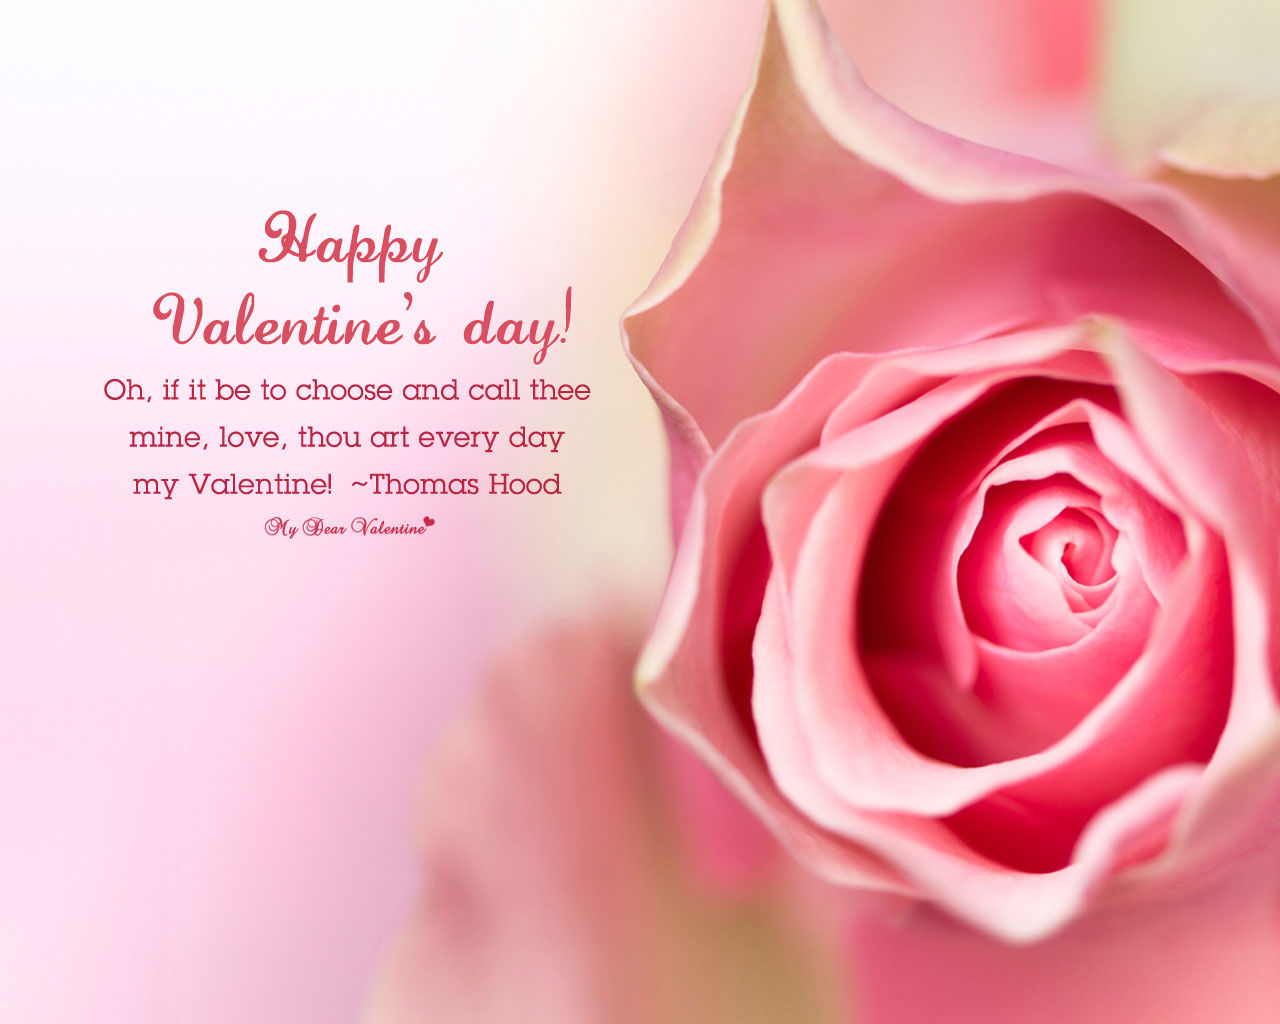 Valentines Day Quotes Bing Images. QuotesGram1280 x 1024